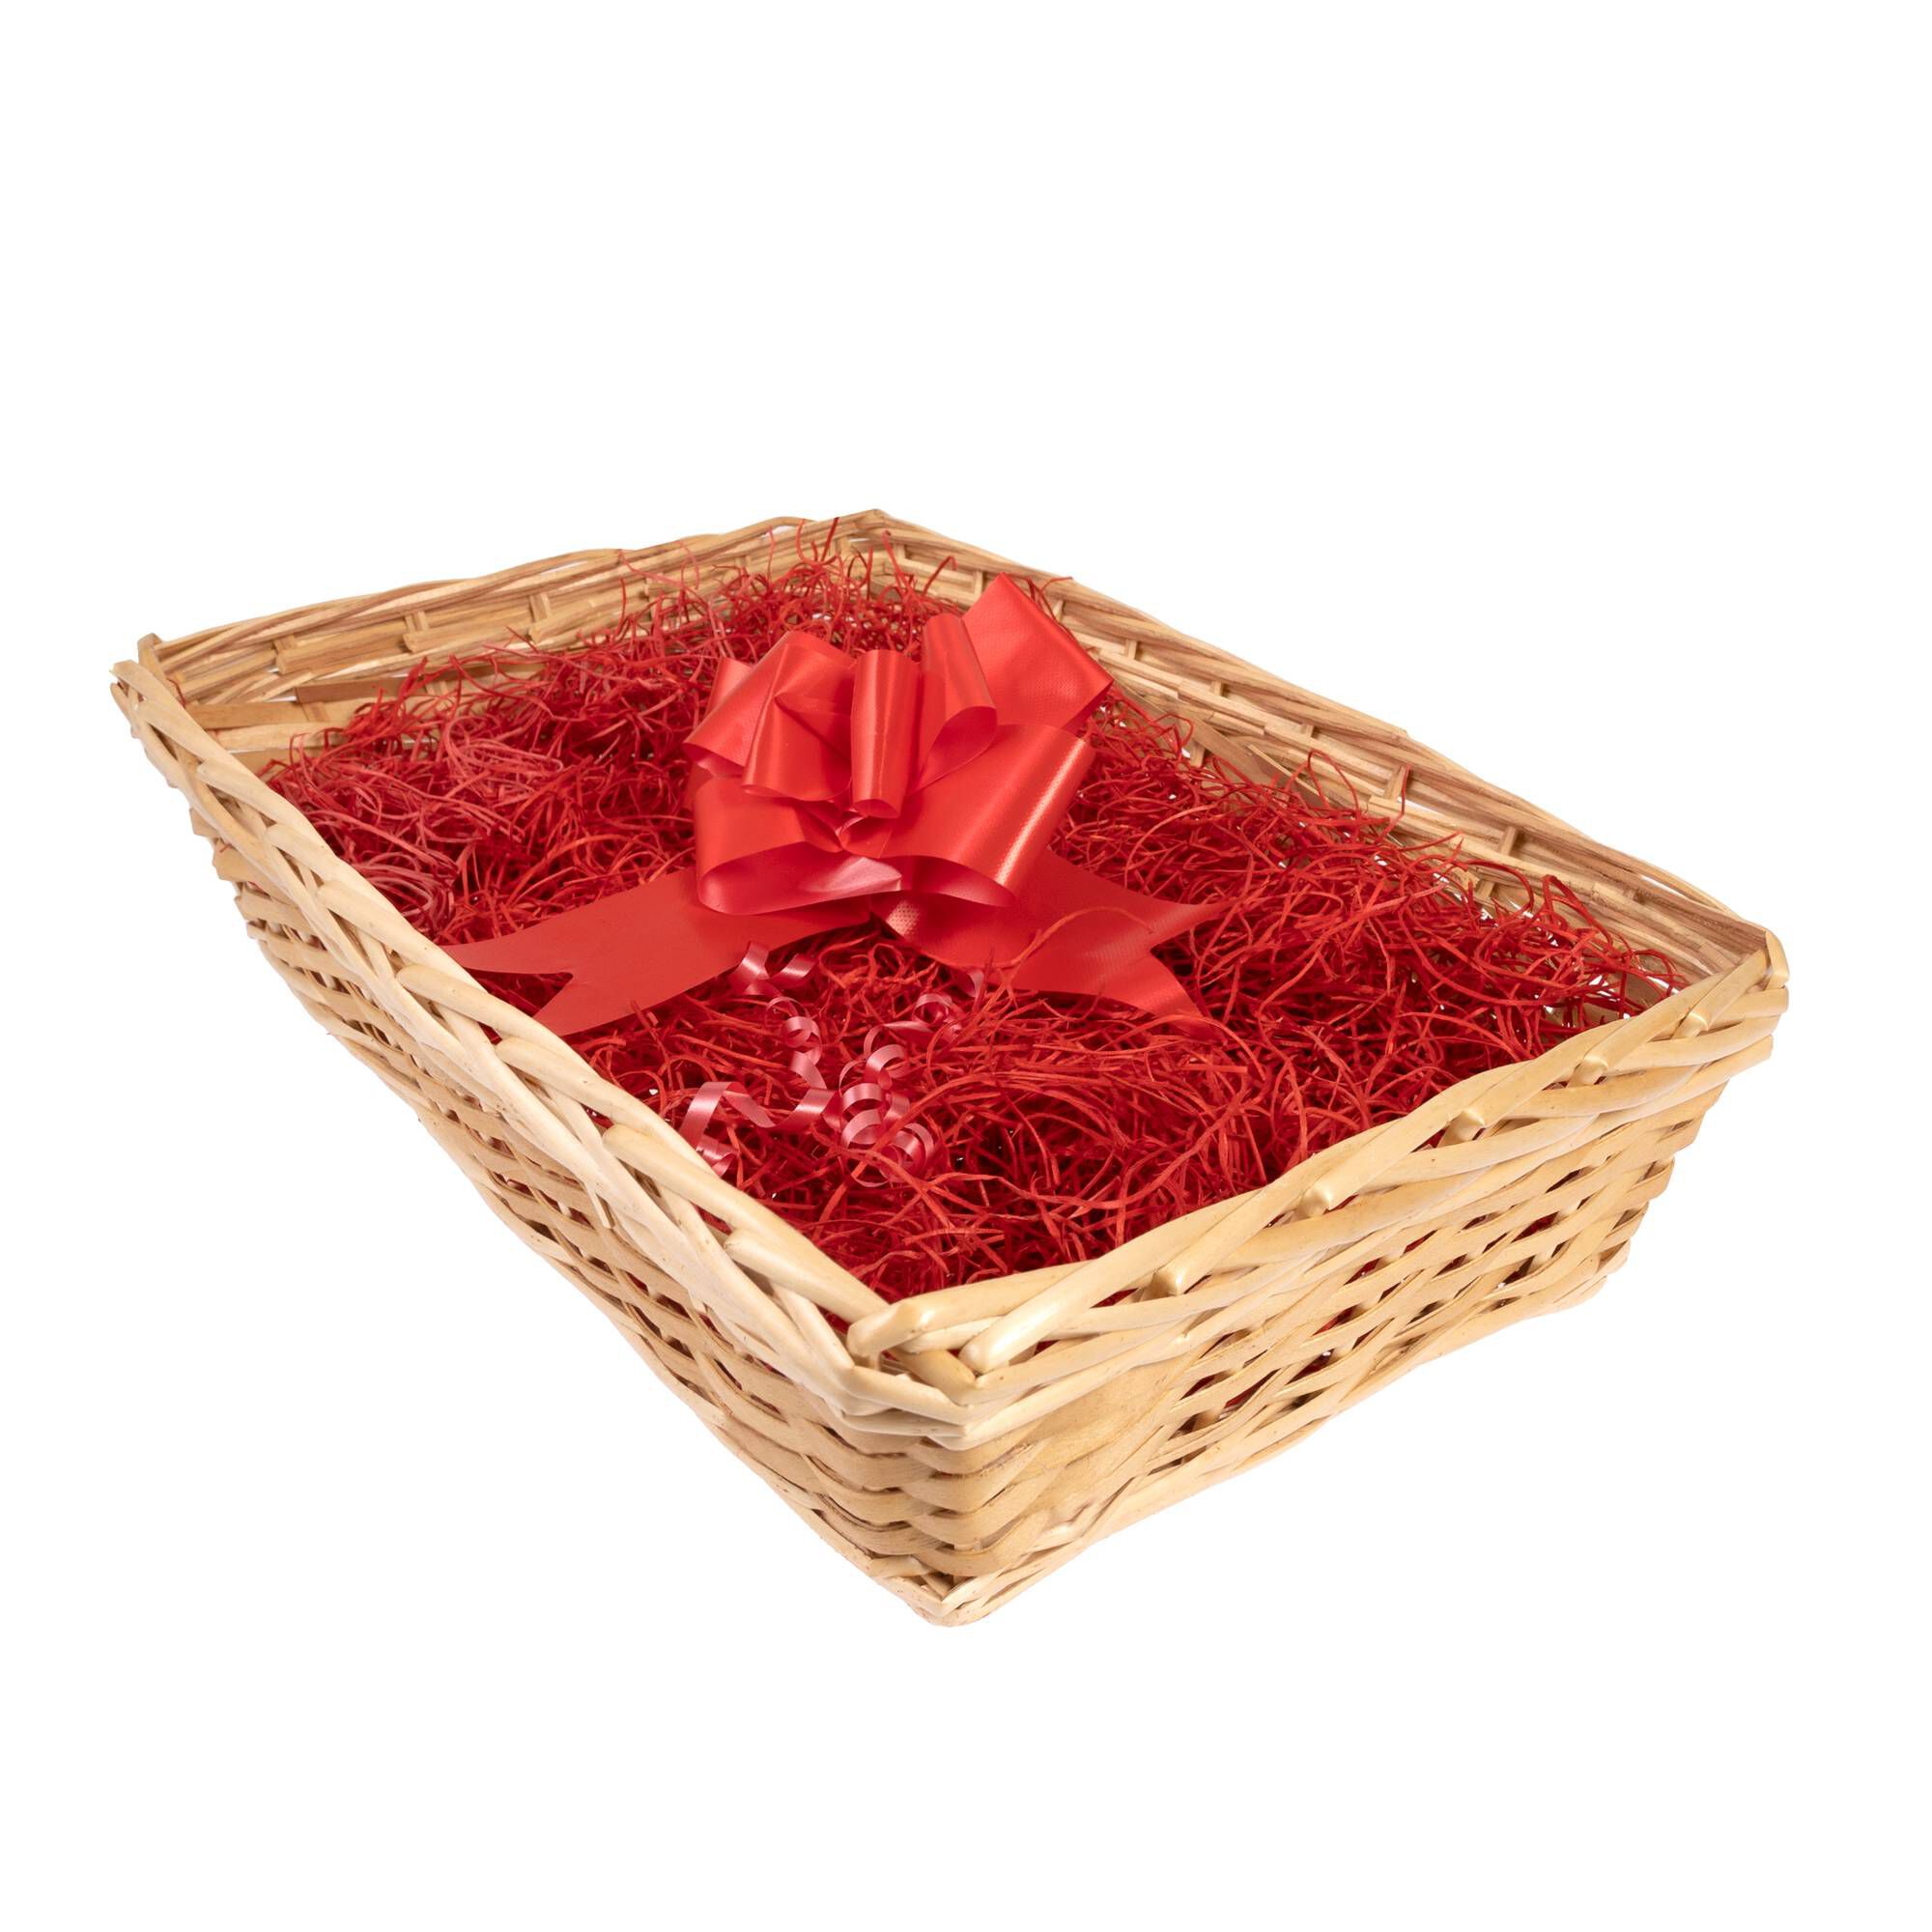 Wholesale Baskets | Empty Gift Basket Containers & Supplies - Wald Imports